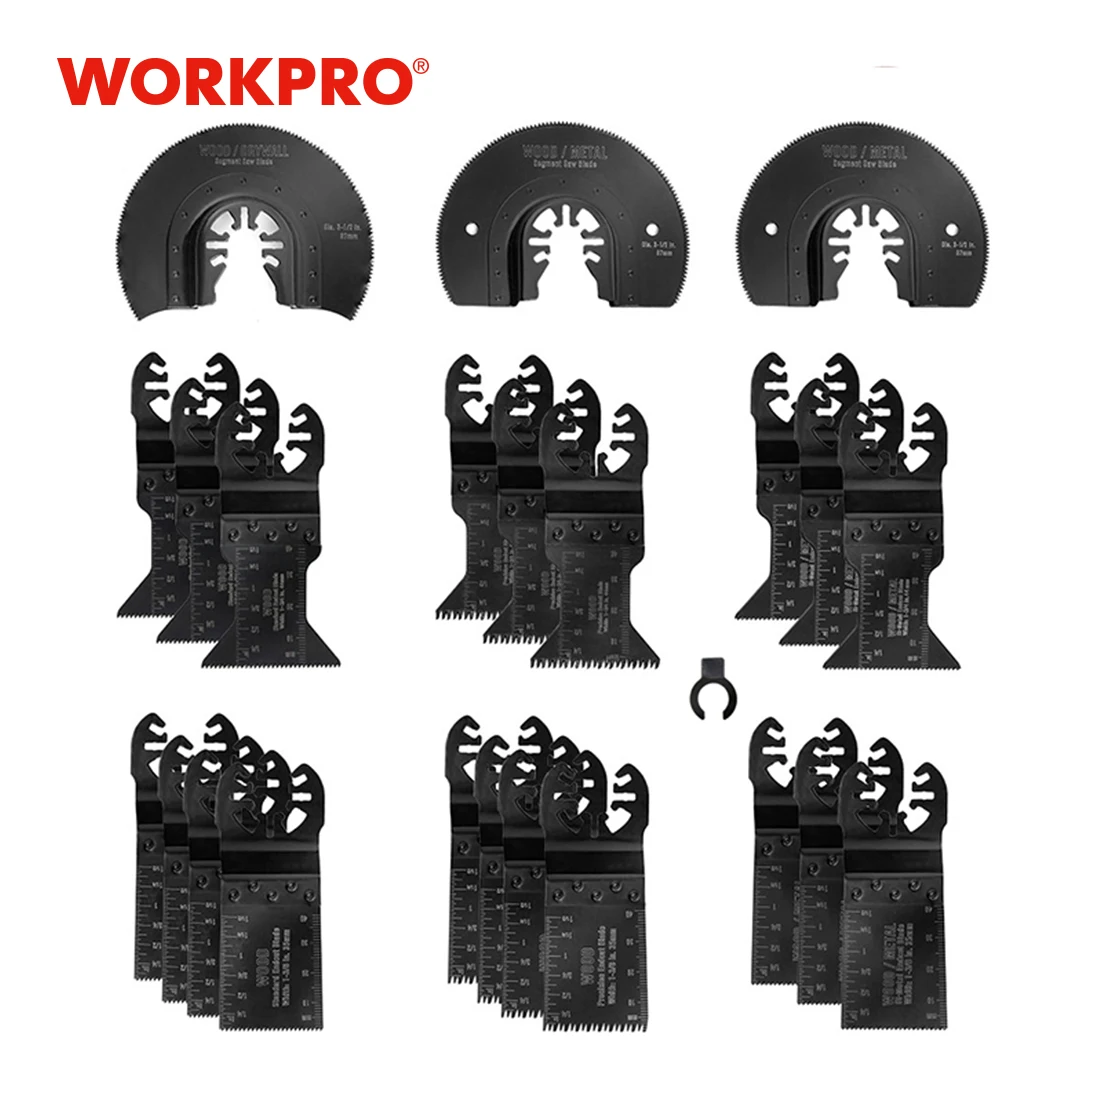 WORKPRO 23-piece Multi tool Saw Blades Quick Release Saw Blades Multi Oscillating Saw Blades for Metal wood